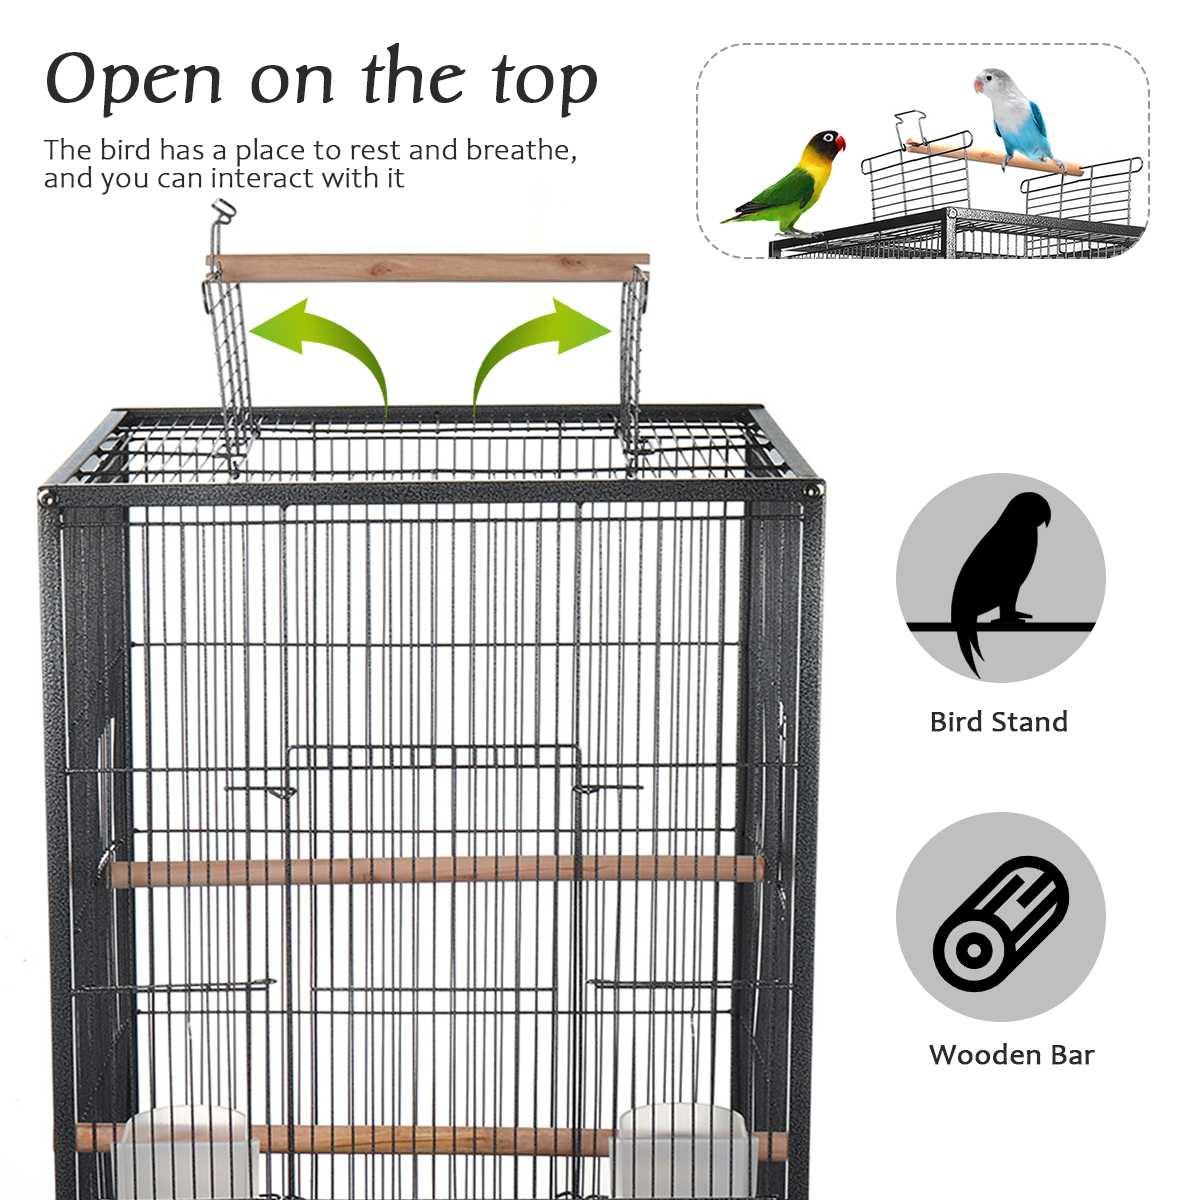 Luxury Large Parrot Cage Bird Metal Cage Pigeon Supplies with Hanging Cave Pet Decor Products